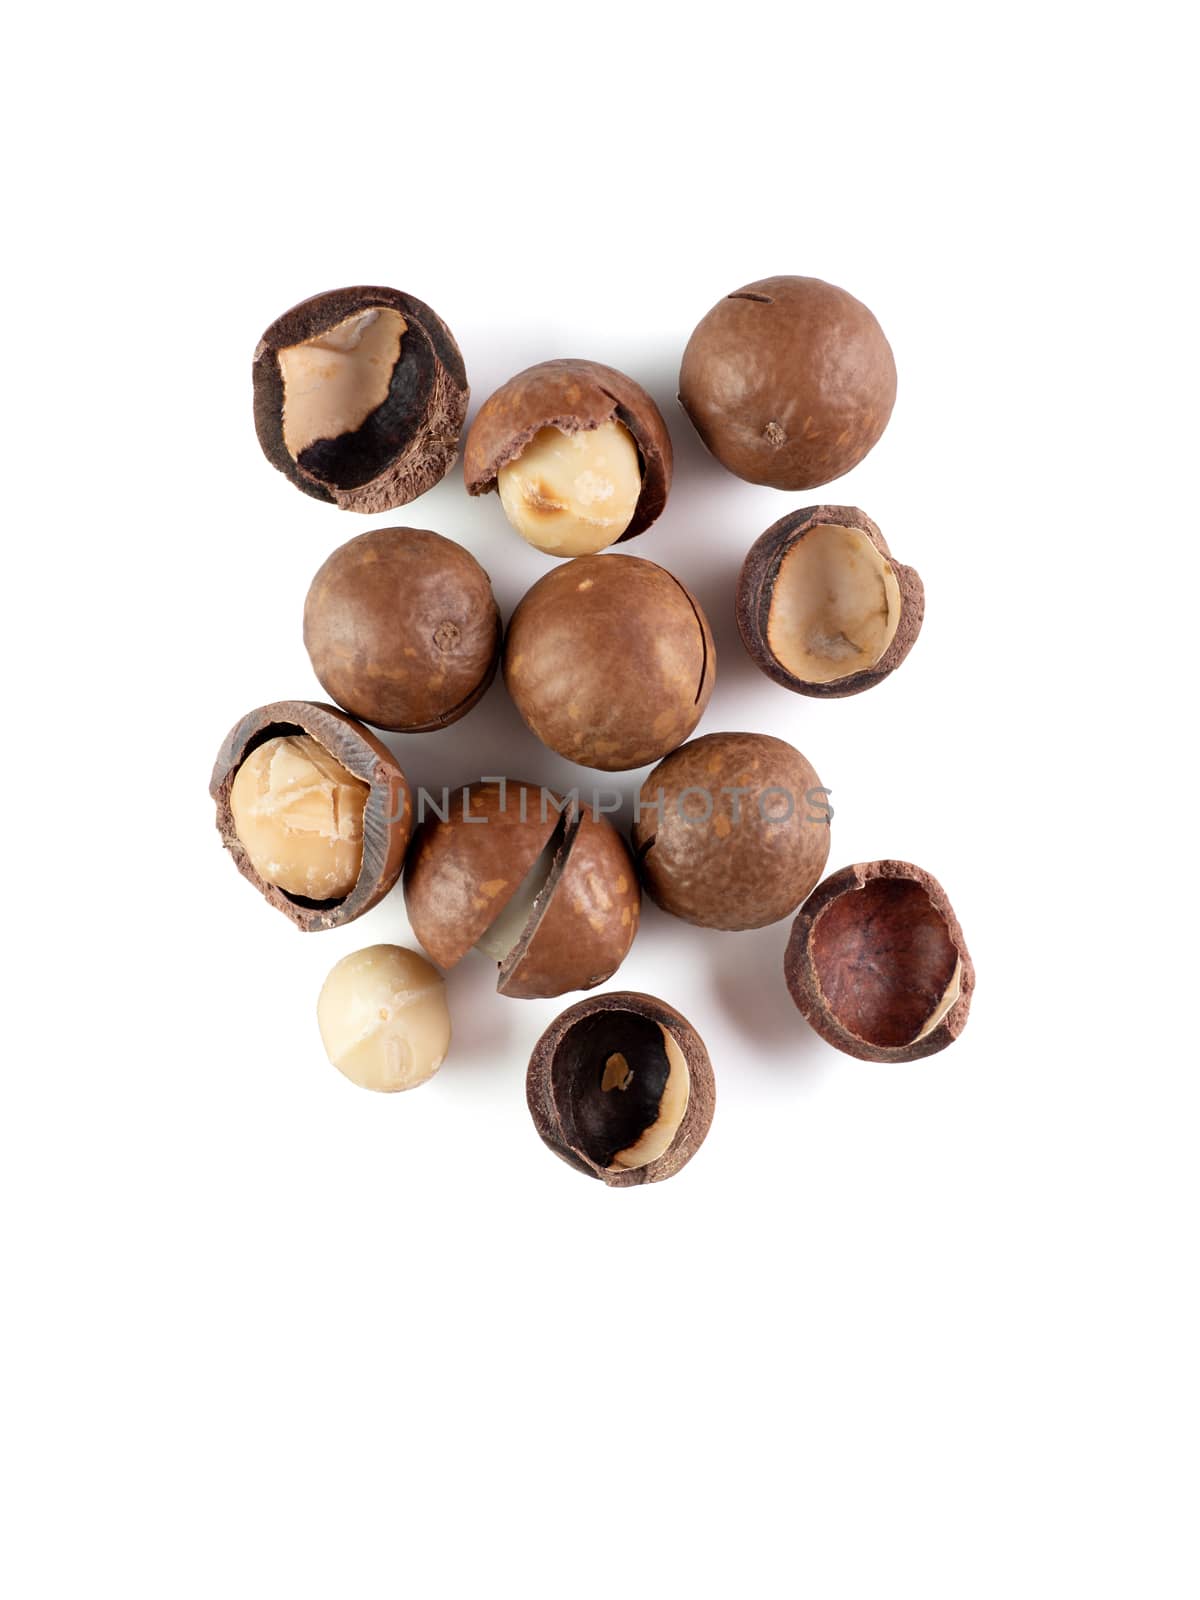 Heap of macadamia nuts on white background with clipping path.. Set of peeled and unpeeled macadamia nuts isolated on white, top view or flat lay. Vertical. Copy space for text.